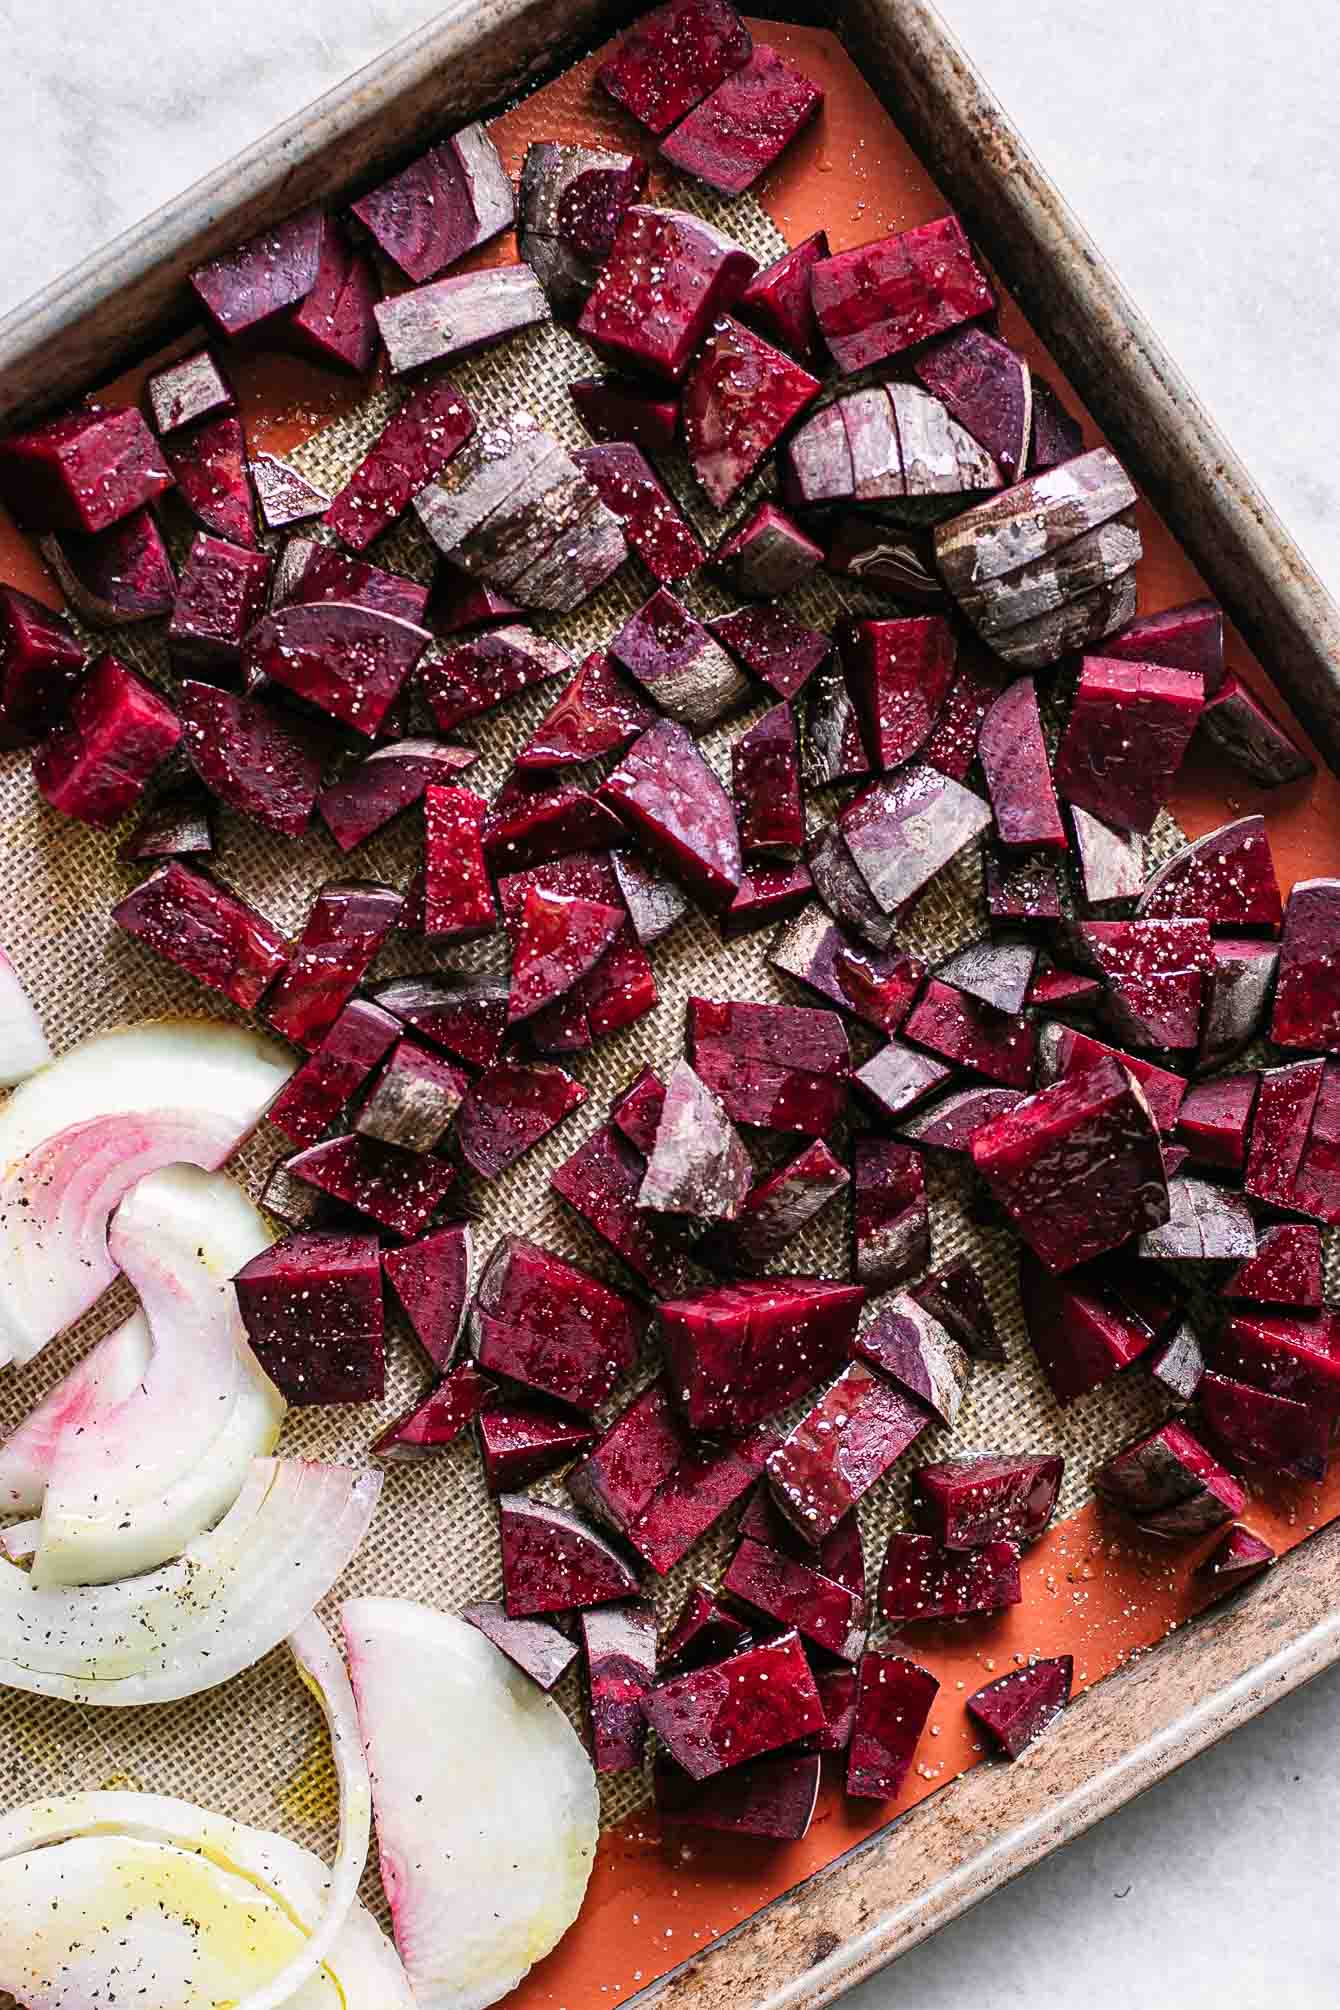 cut beets and sliced onions on a baking sheet before roasting